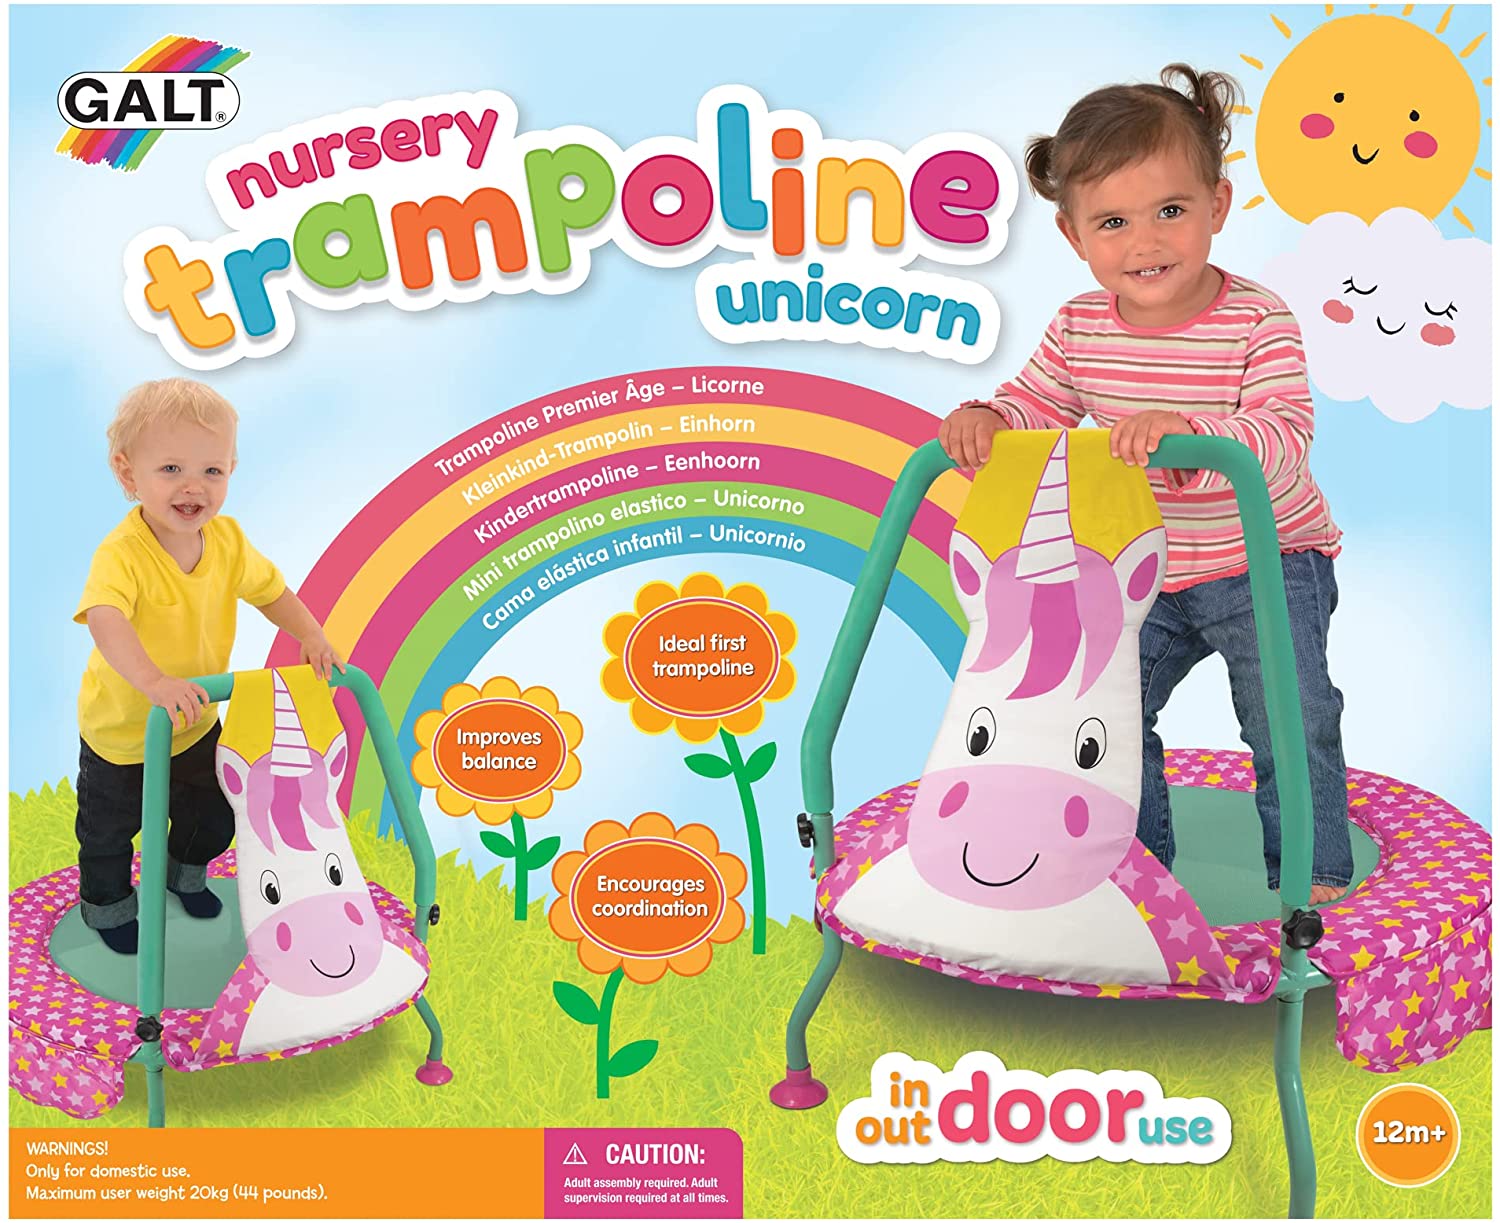 Galt Toys, Nursery Trampoline - Unicorn, Trampolines for Kids, Ages 1 Year Plus - image 5 of 7